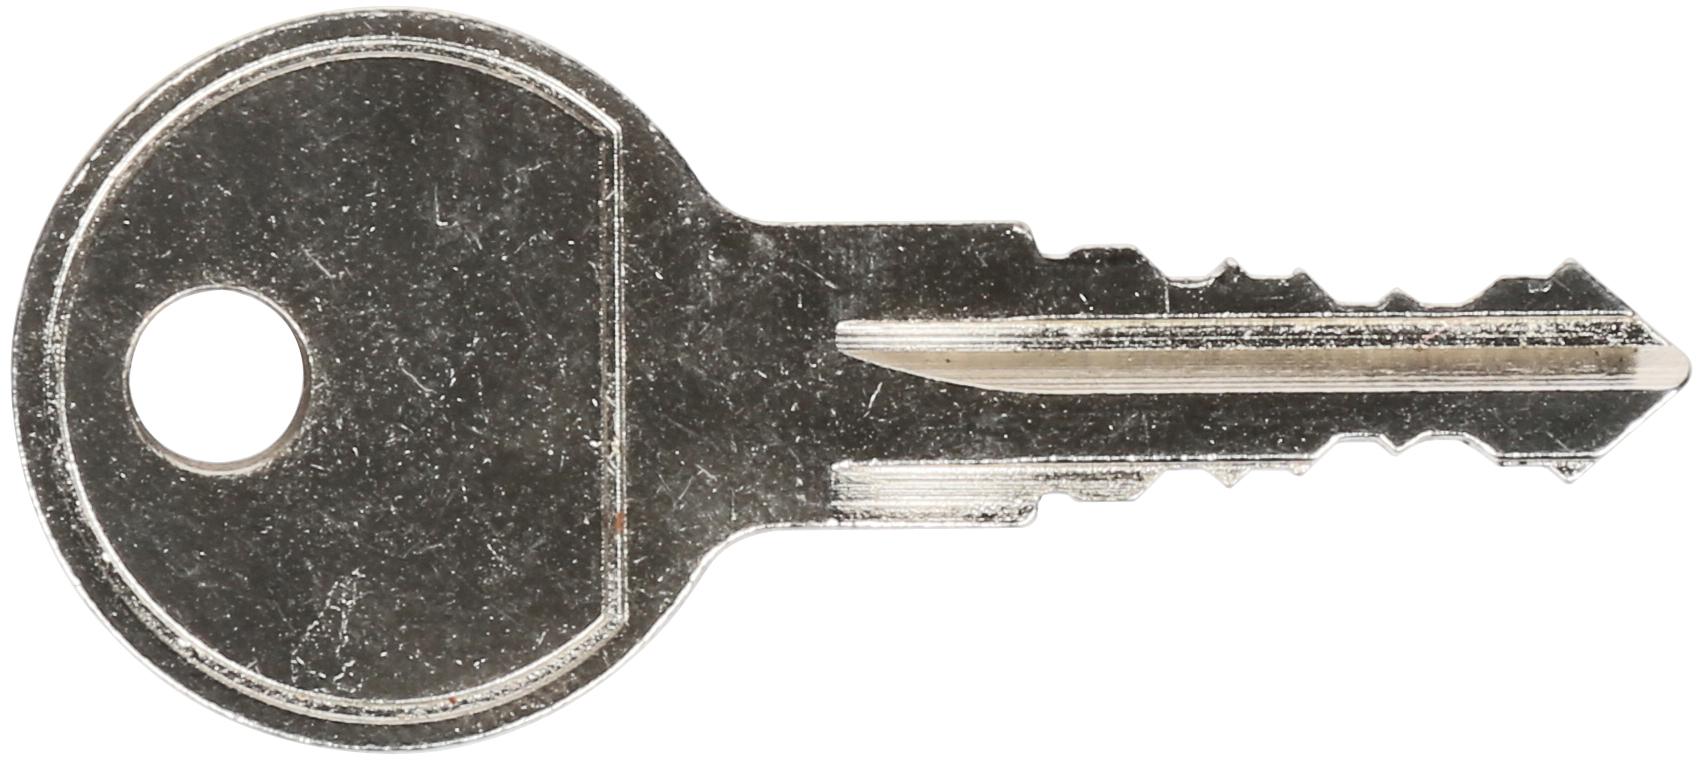 Spare Roof Box Key 005